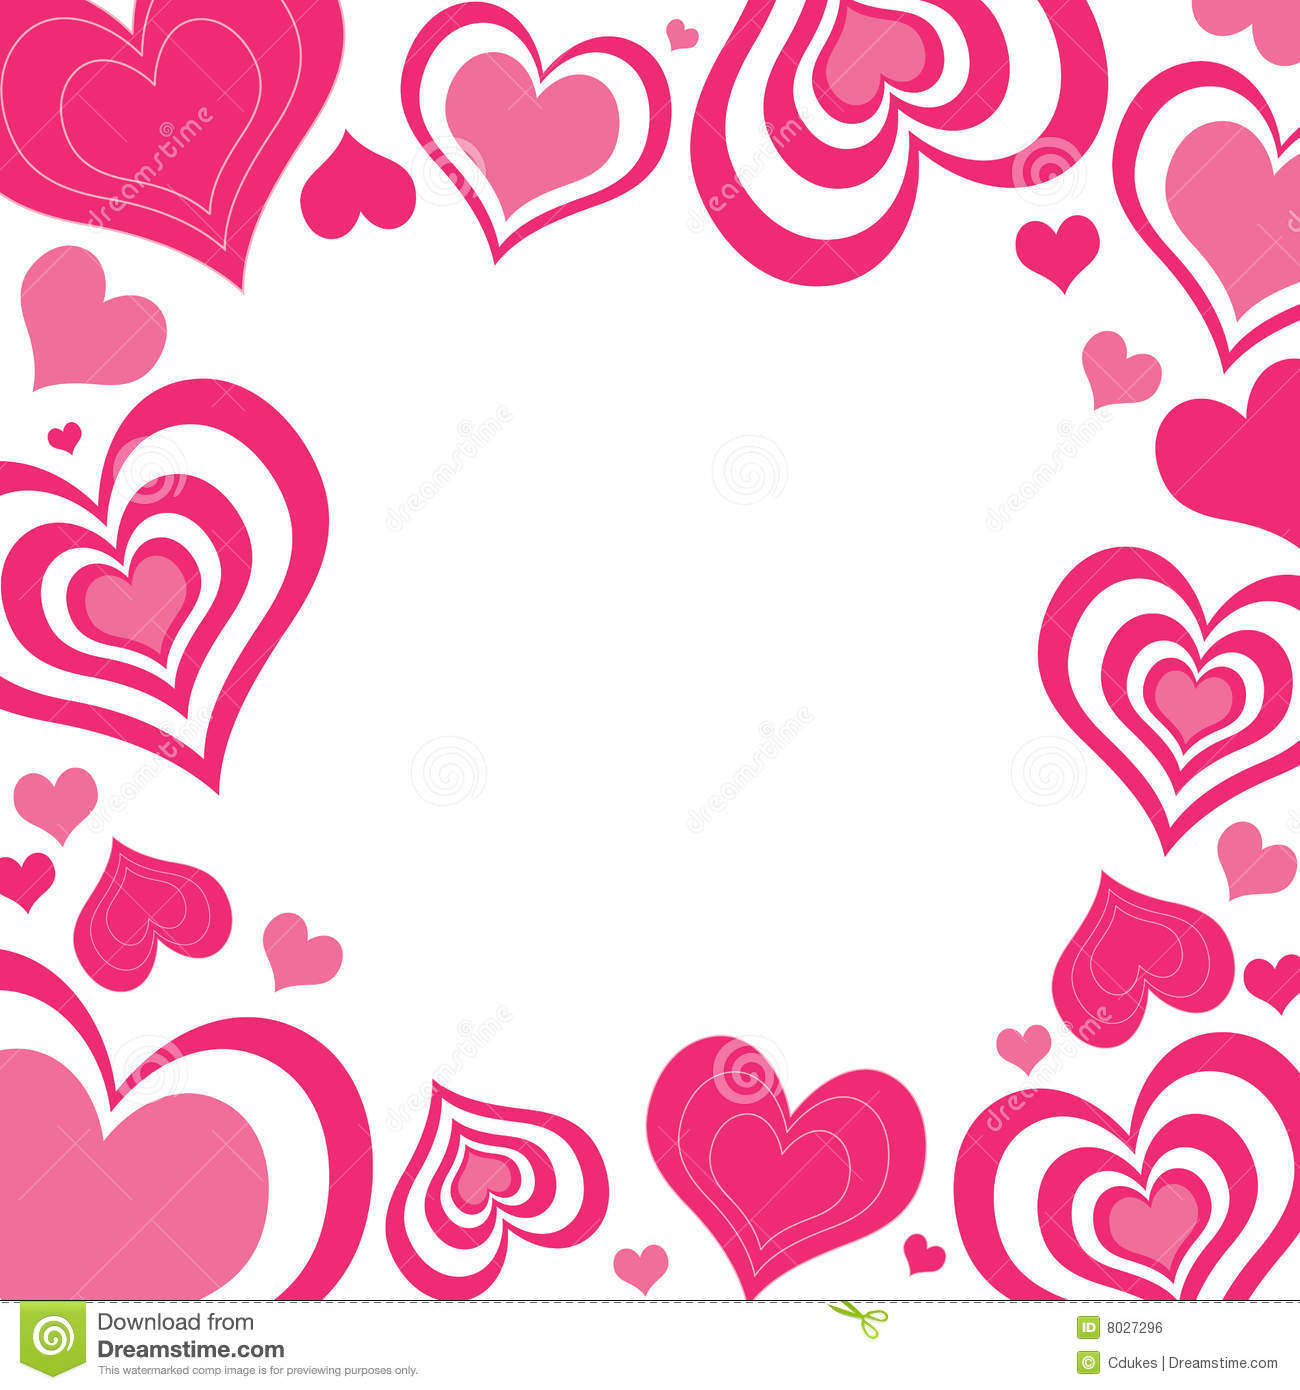 free-clipart-heart-borders-clipground